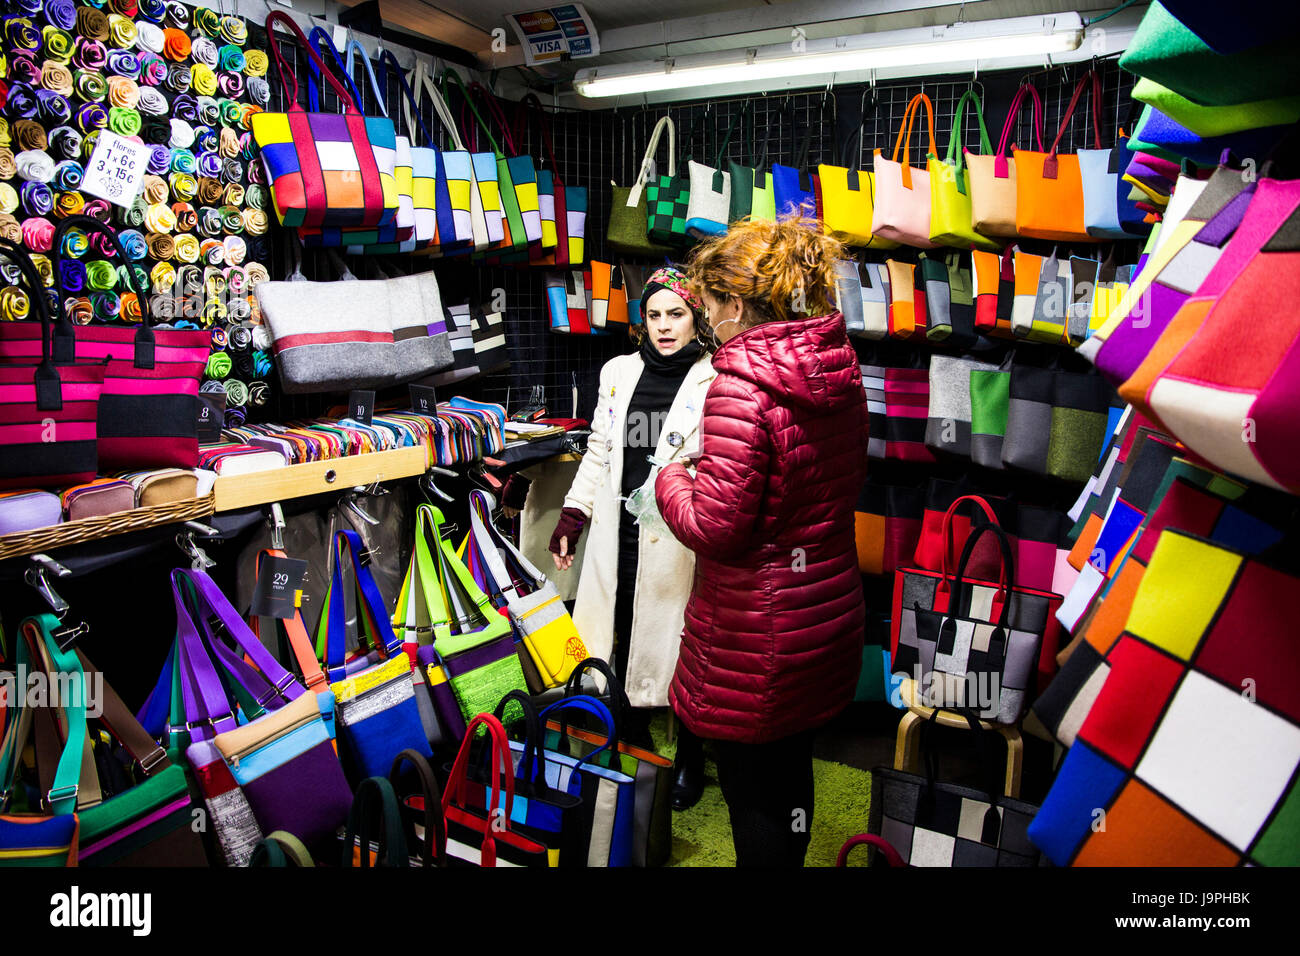 This shop on Portal de L'Angel features and array of colorful handbags, Barcelona, Spain. Stock Photo